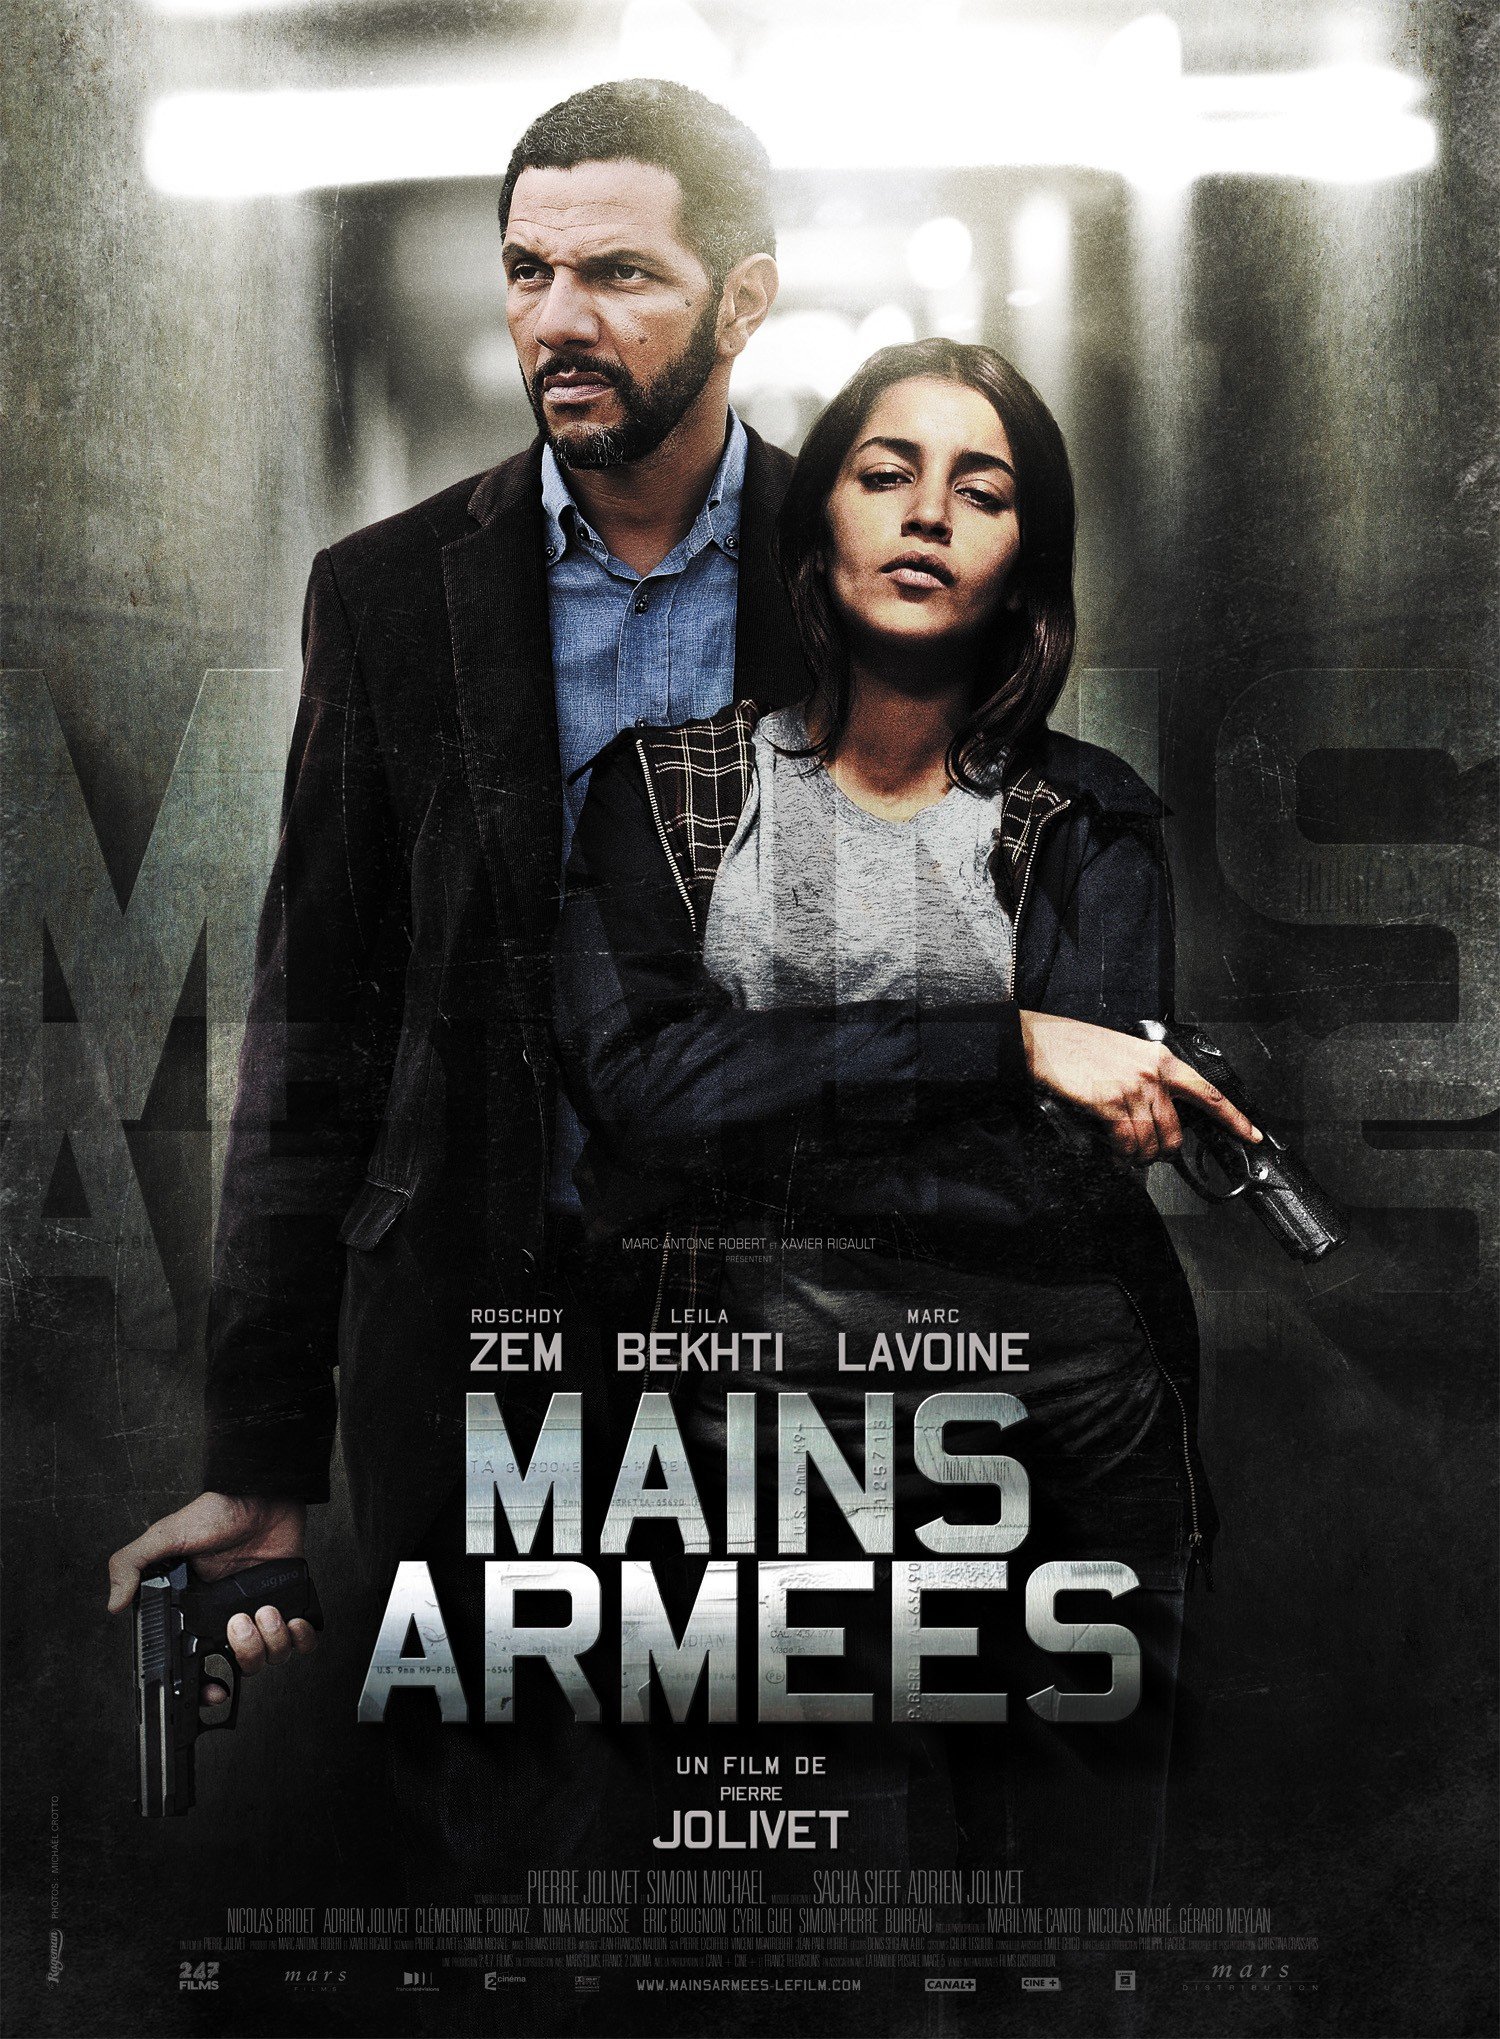 Poster of the movie Mains armées